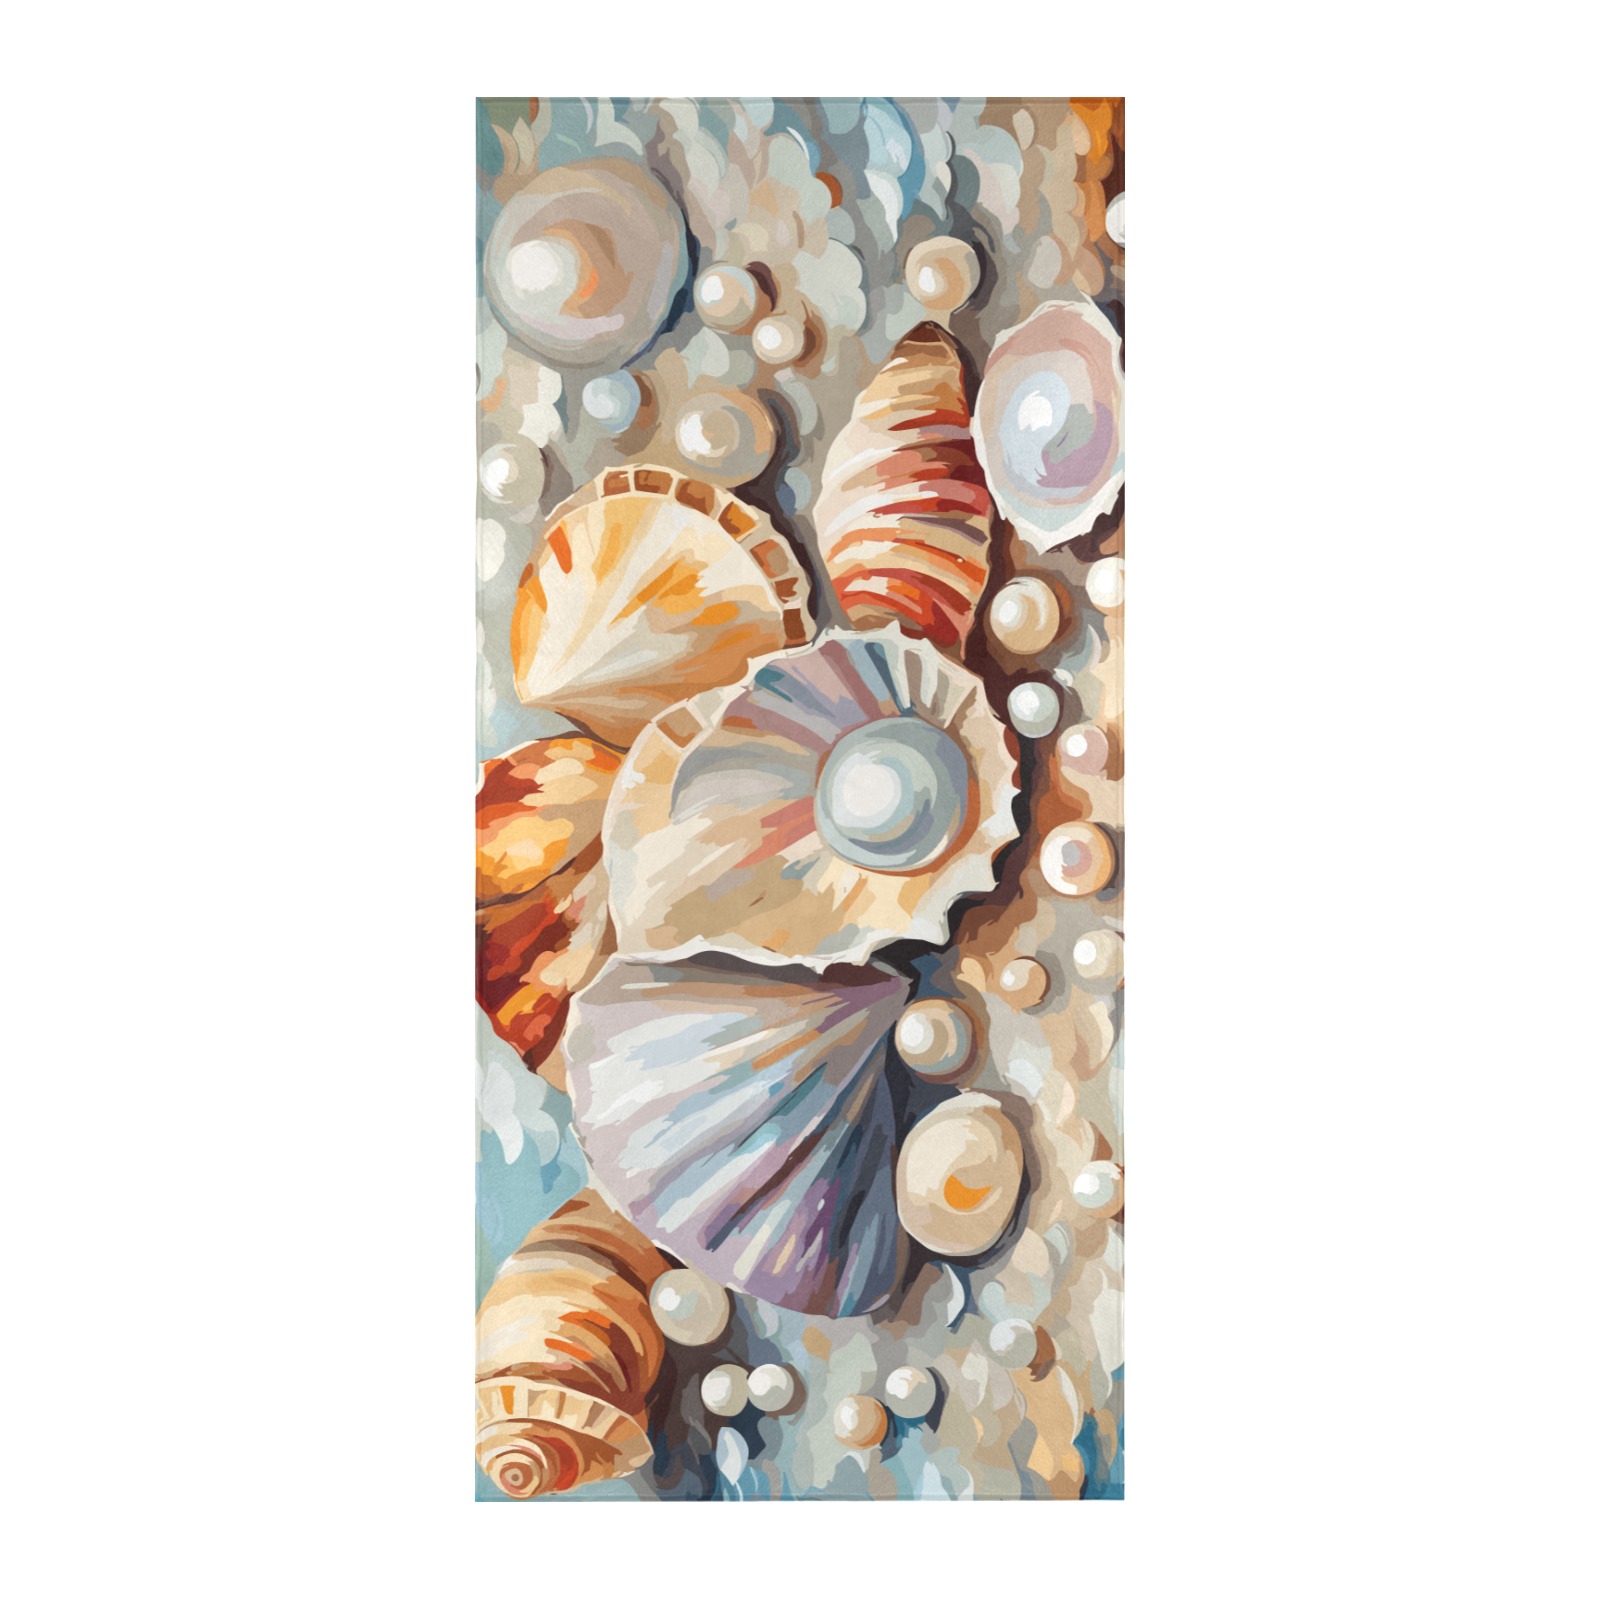 Fantasy of conches, shells, pearls. Pastel colors. Beach Towel 32"x 71"